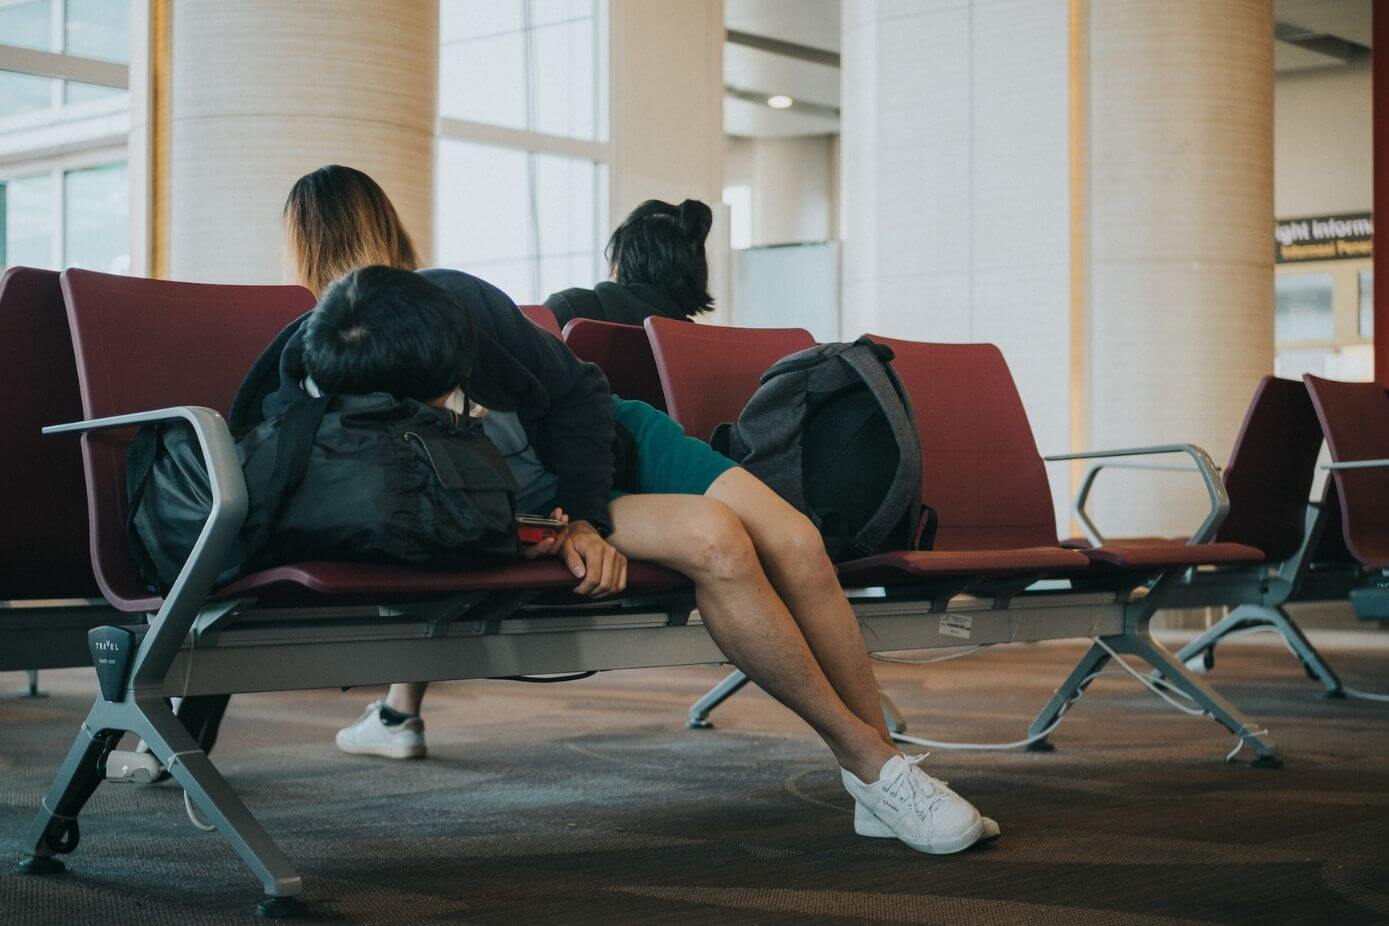 What to do during a layover - Sleep in the airport